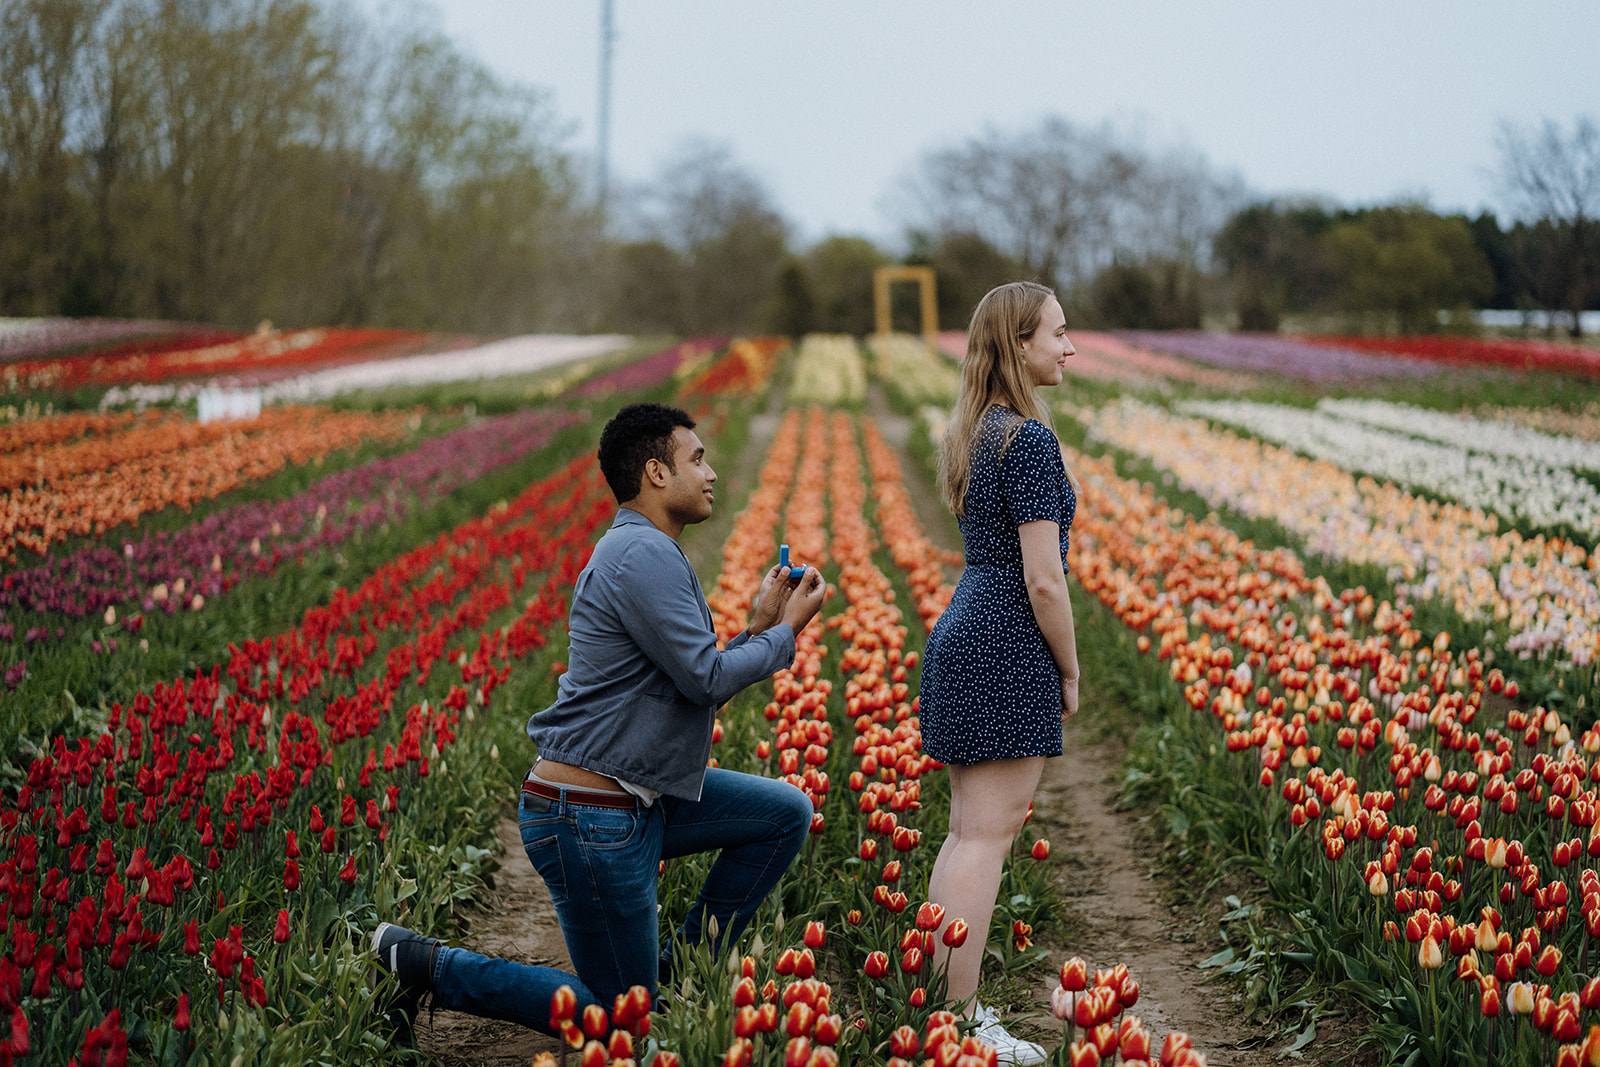 Man kneeling in tulips with his girlfriend facing the other way.